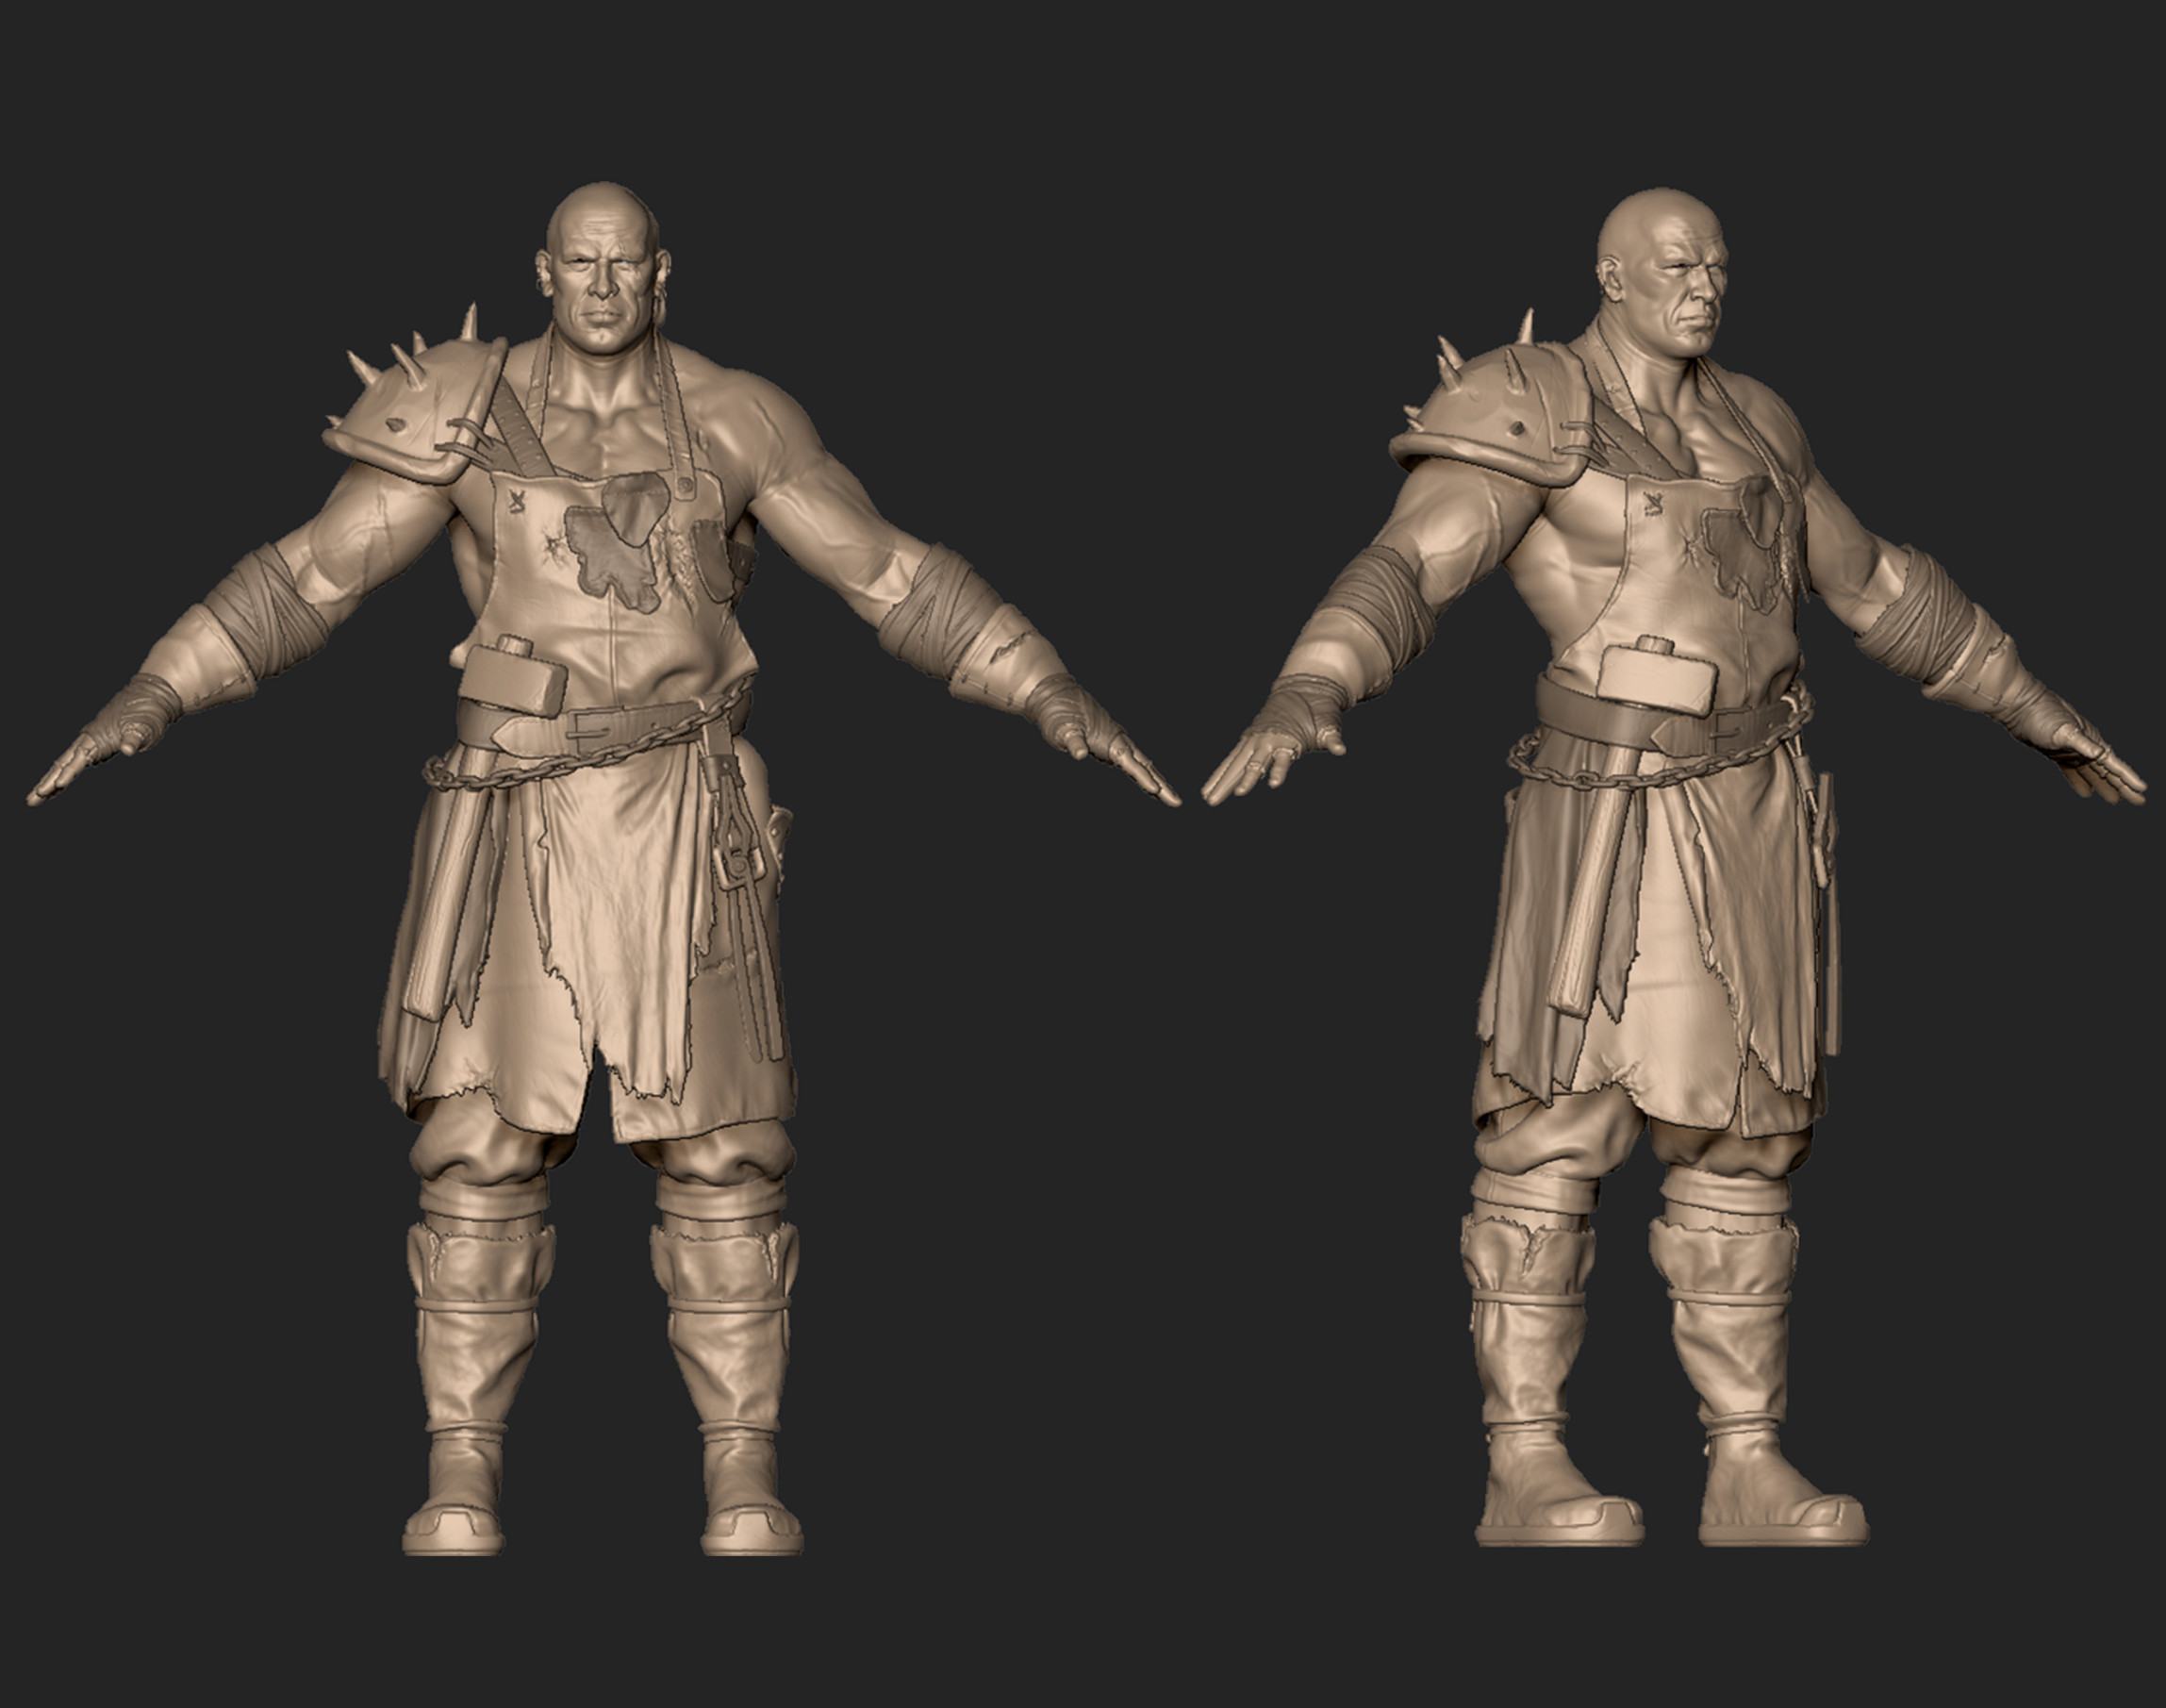 Revived Hilock
Responsible for concepting and hi-poly sculpting. 